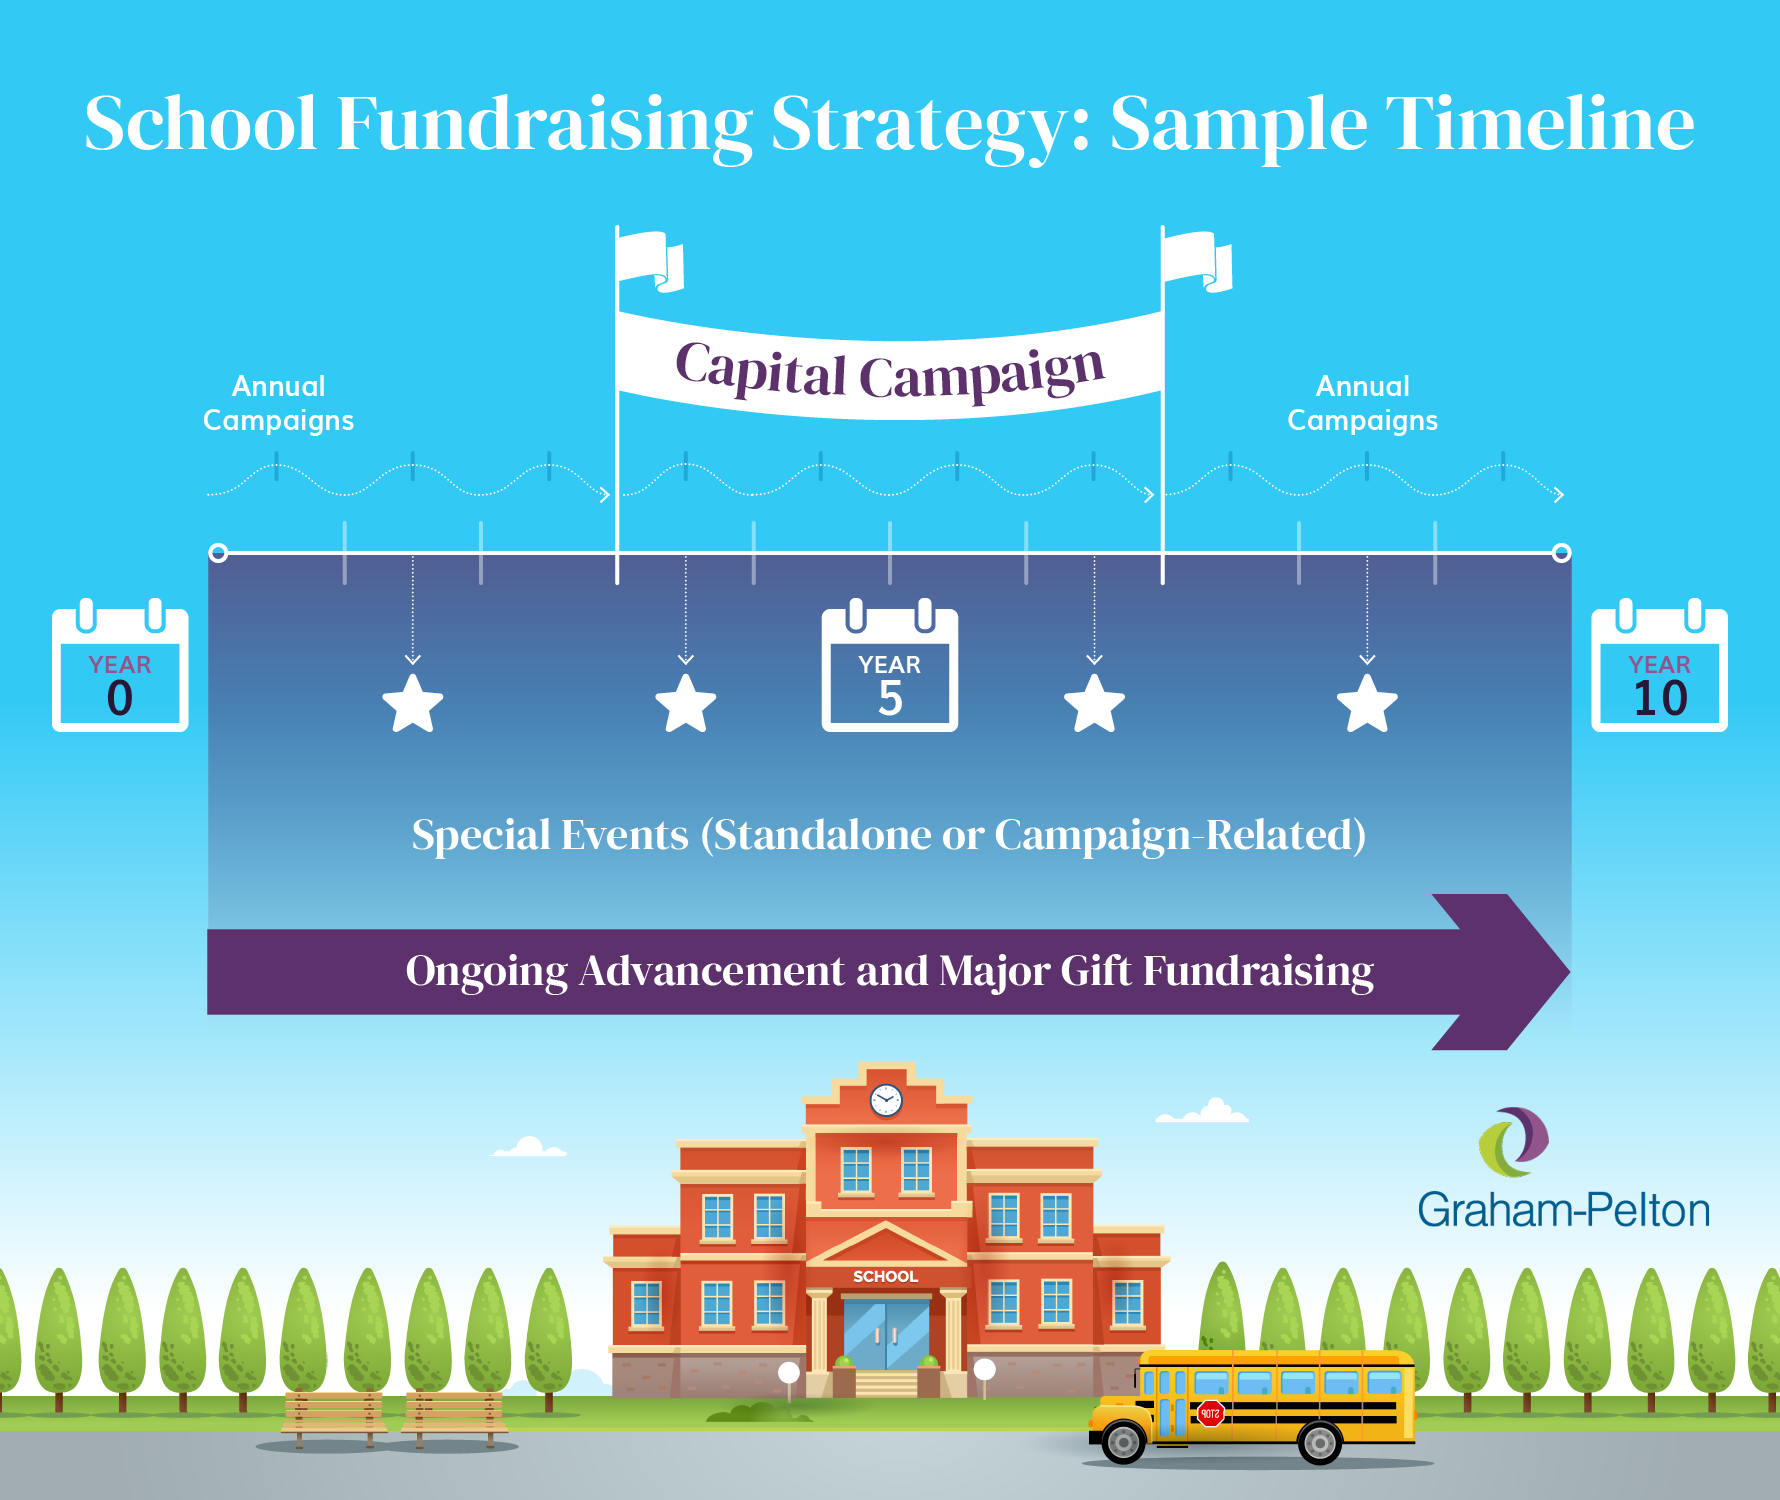 A sample timeline of a private school fundraising strategy, showing overlapping campaigns and events over time, explained in the text below.